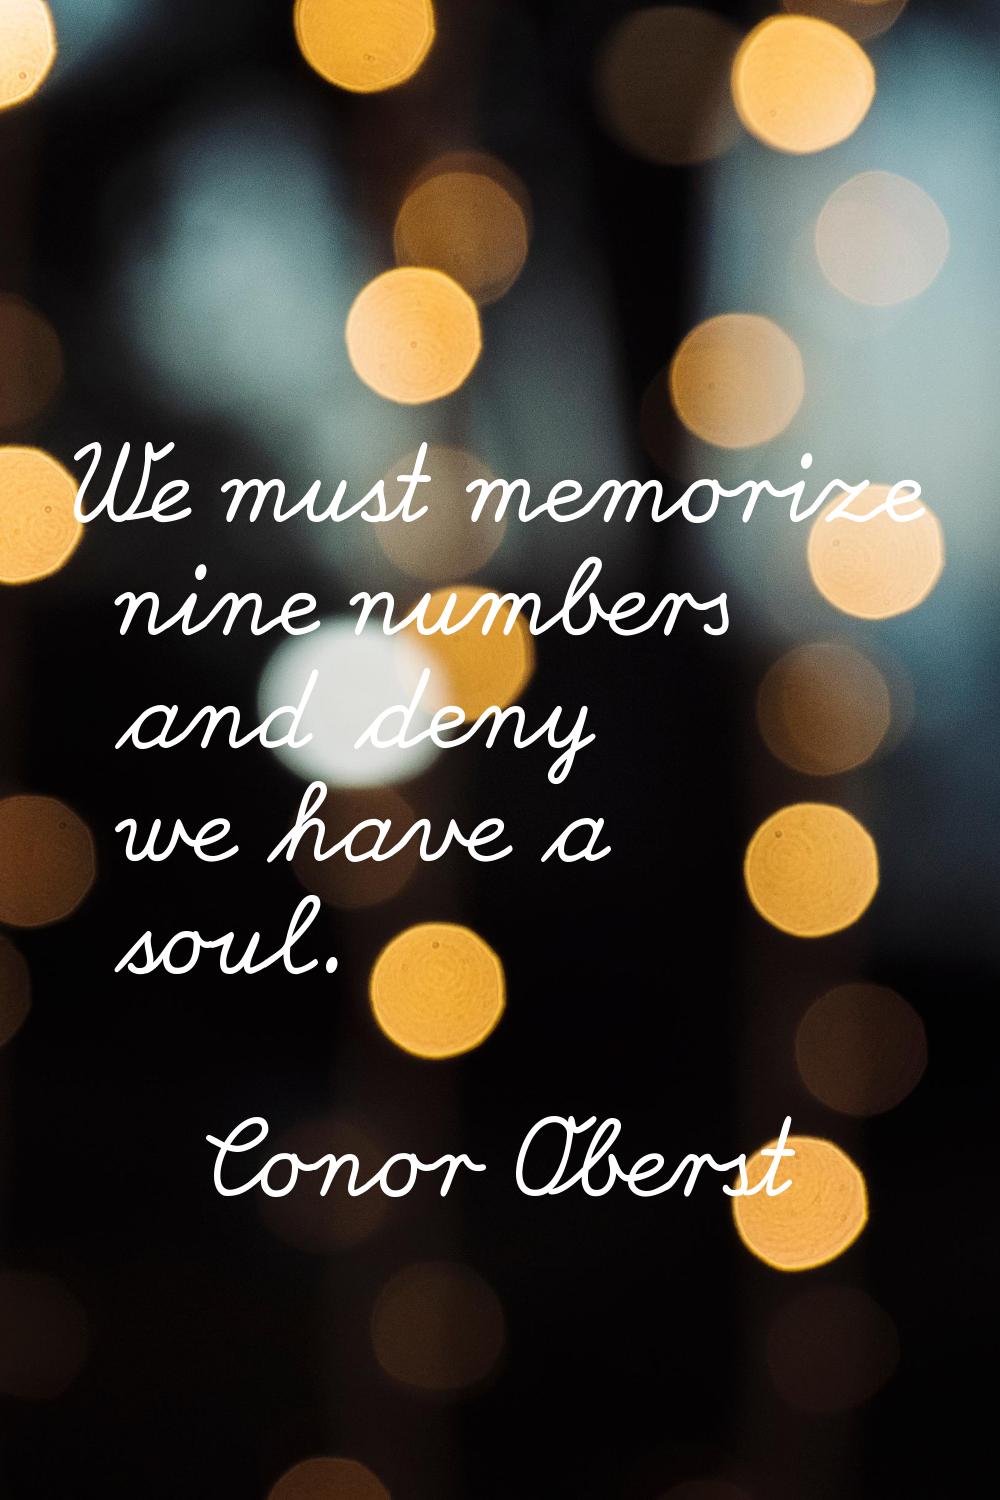 We must memorize nine numbers and deny we have a soul.